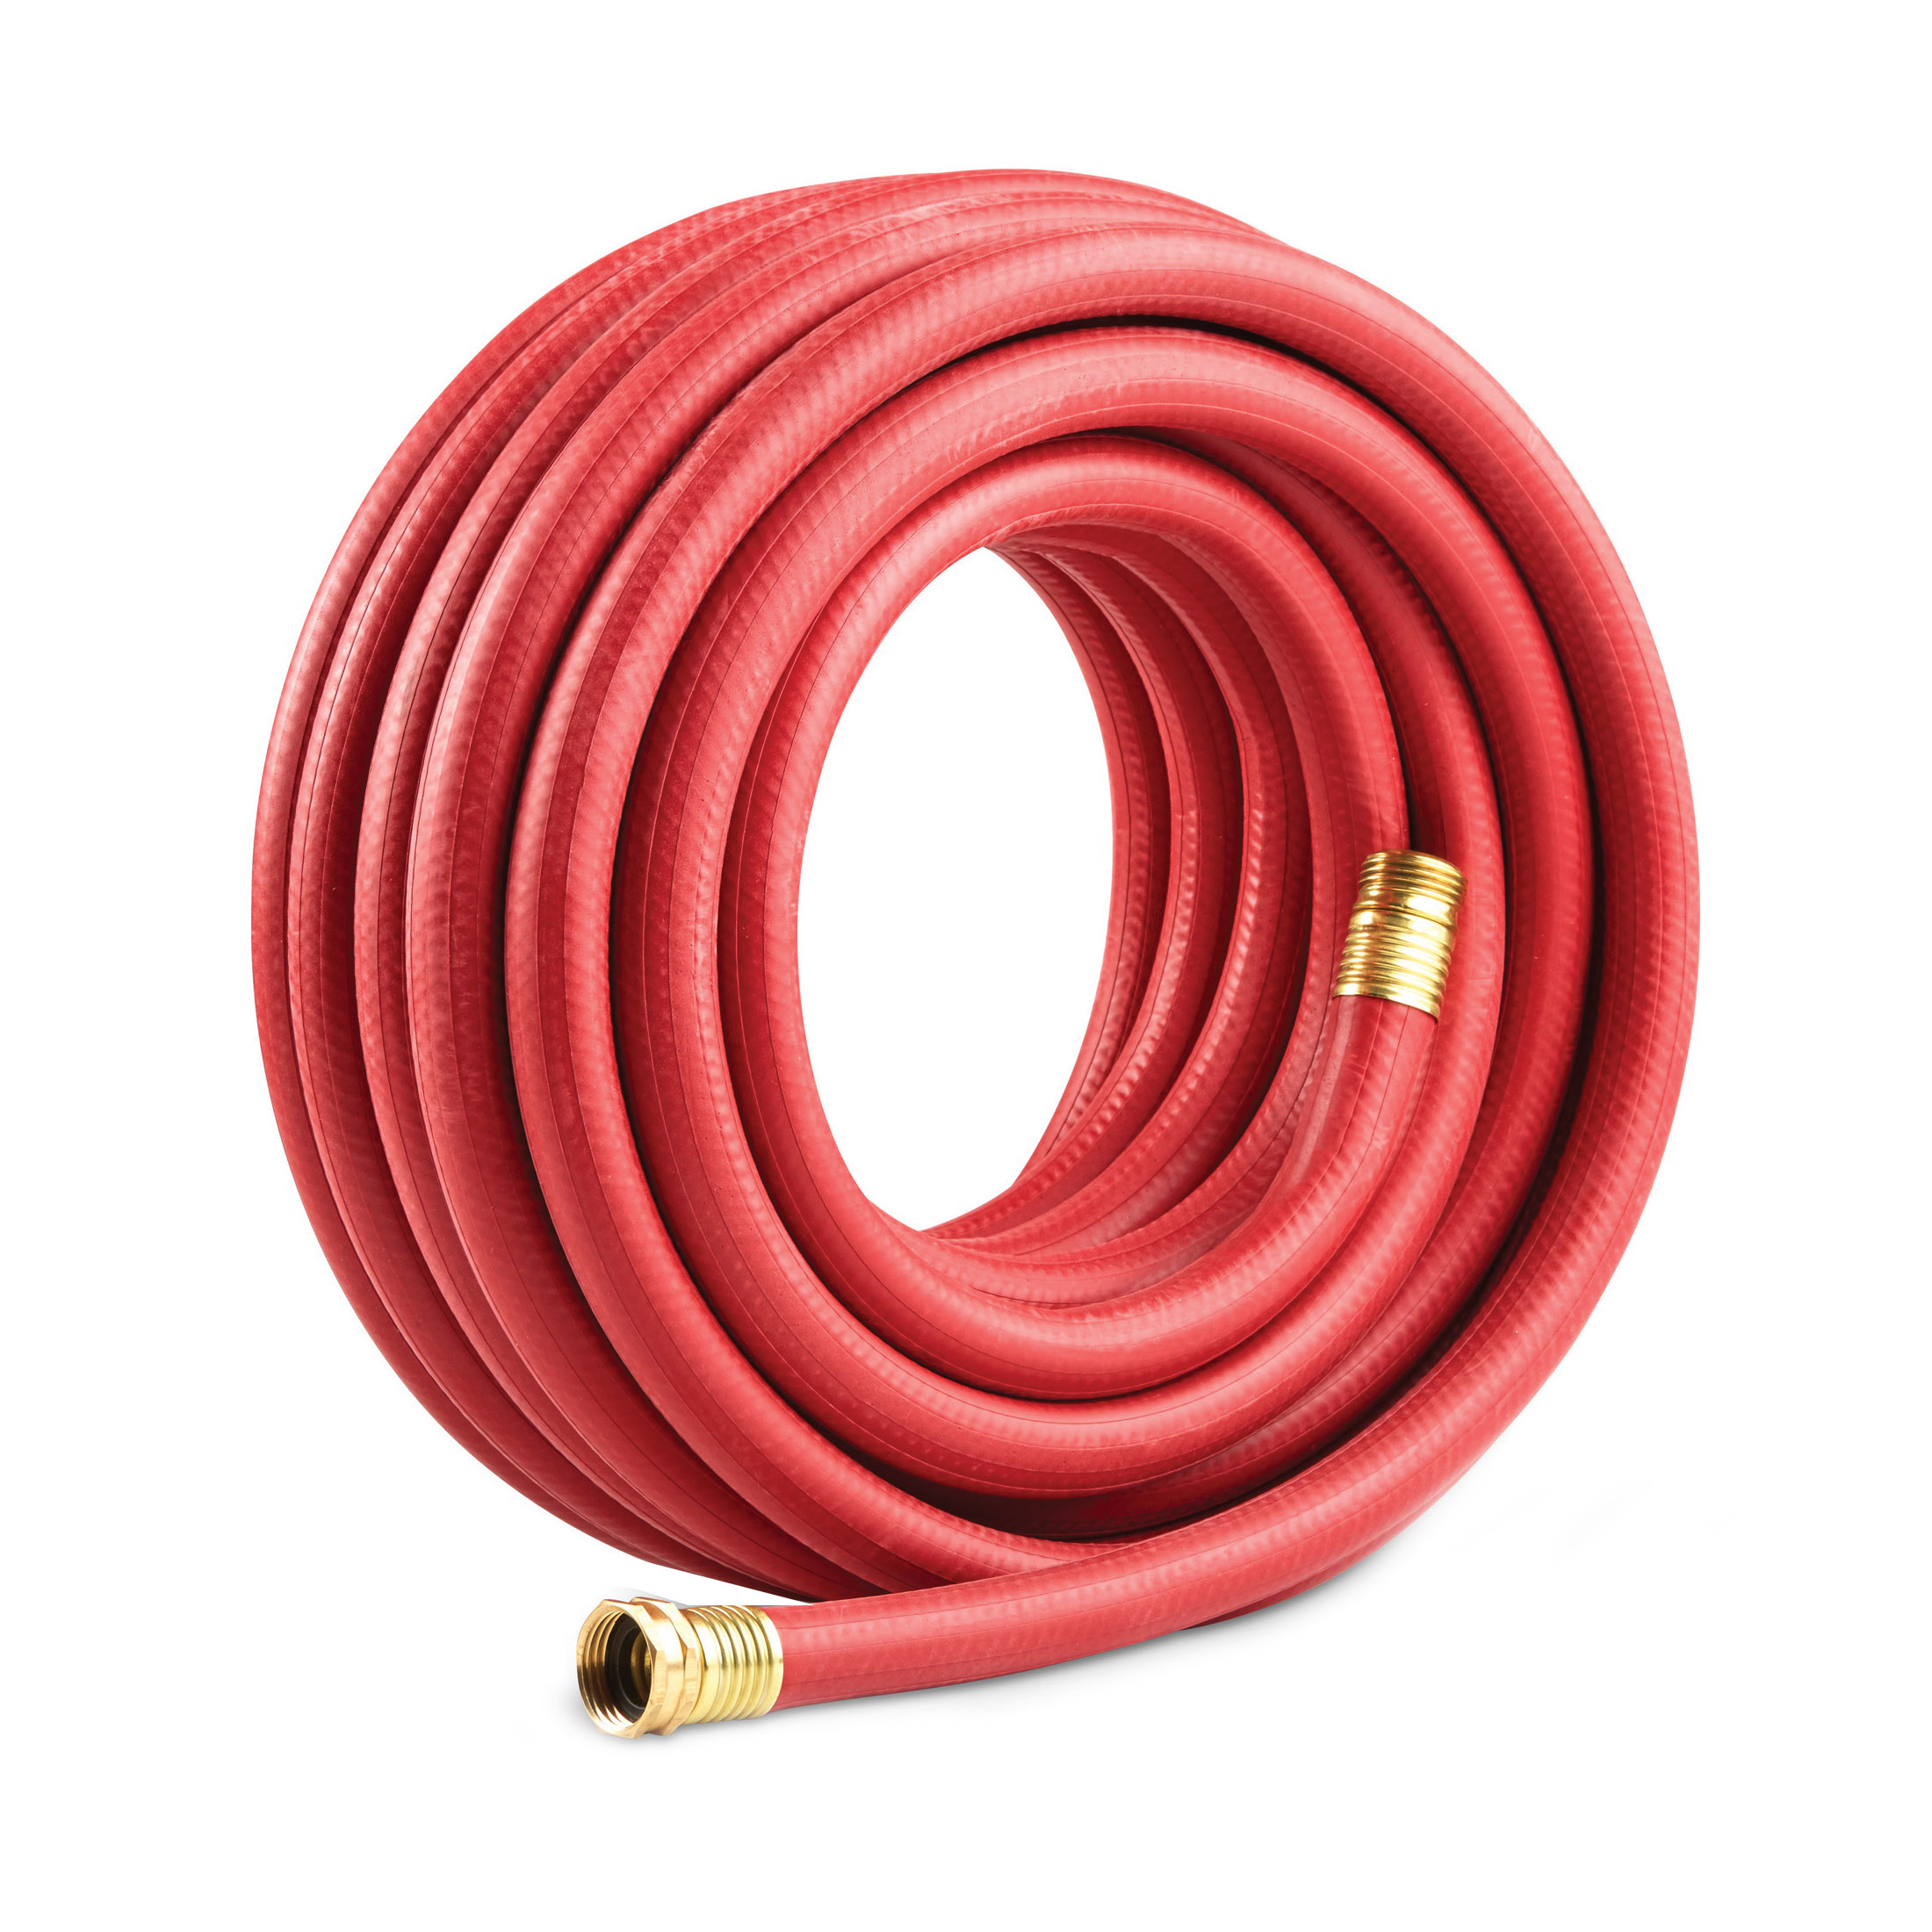 818571-1001 Professional Hose, 3/4 in, 75 ft L, GHT, Brass/Metal/Rubber, Red